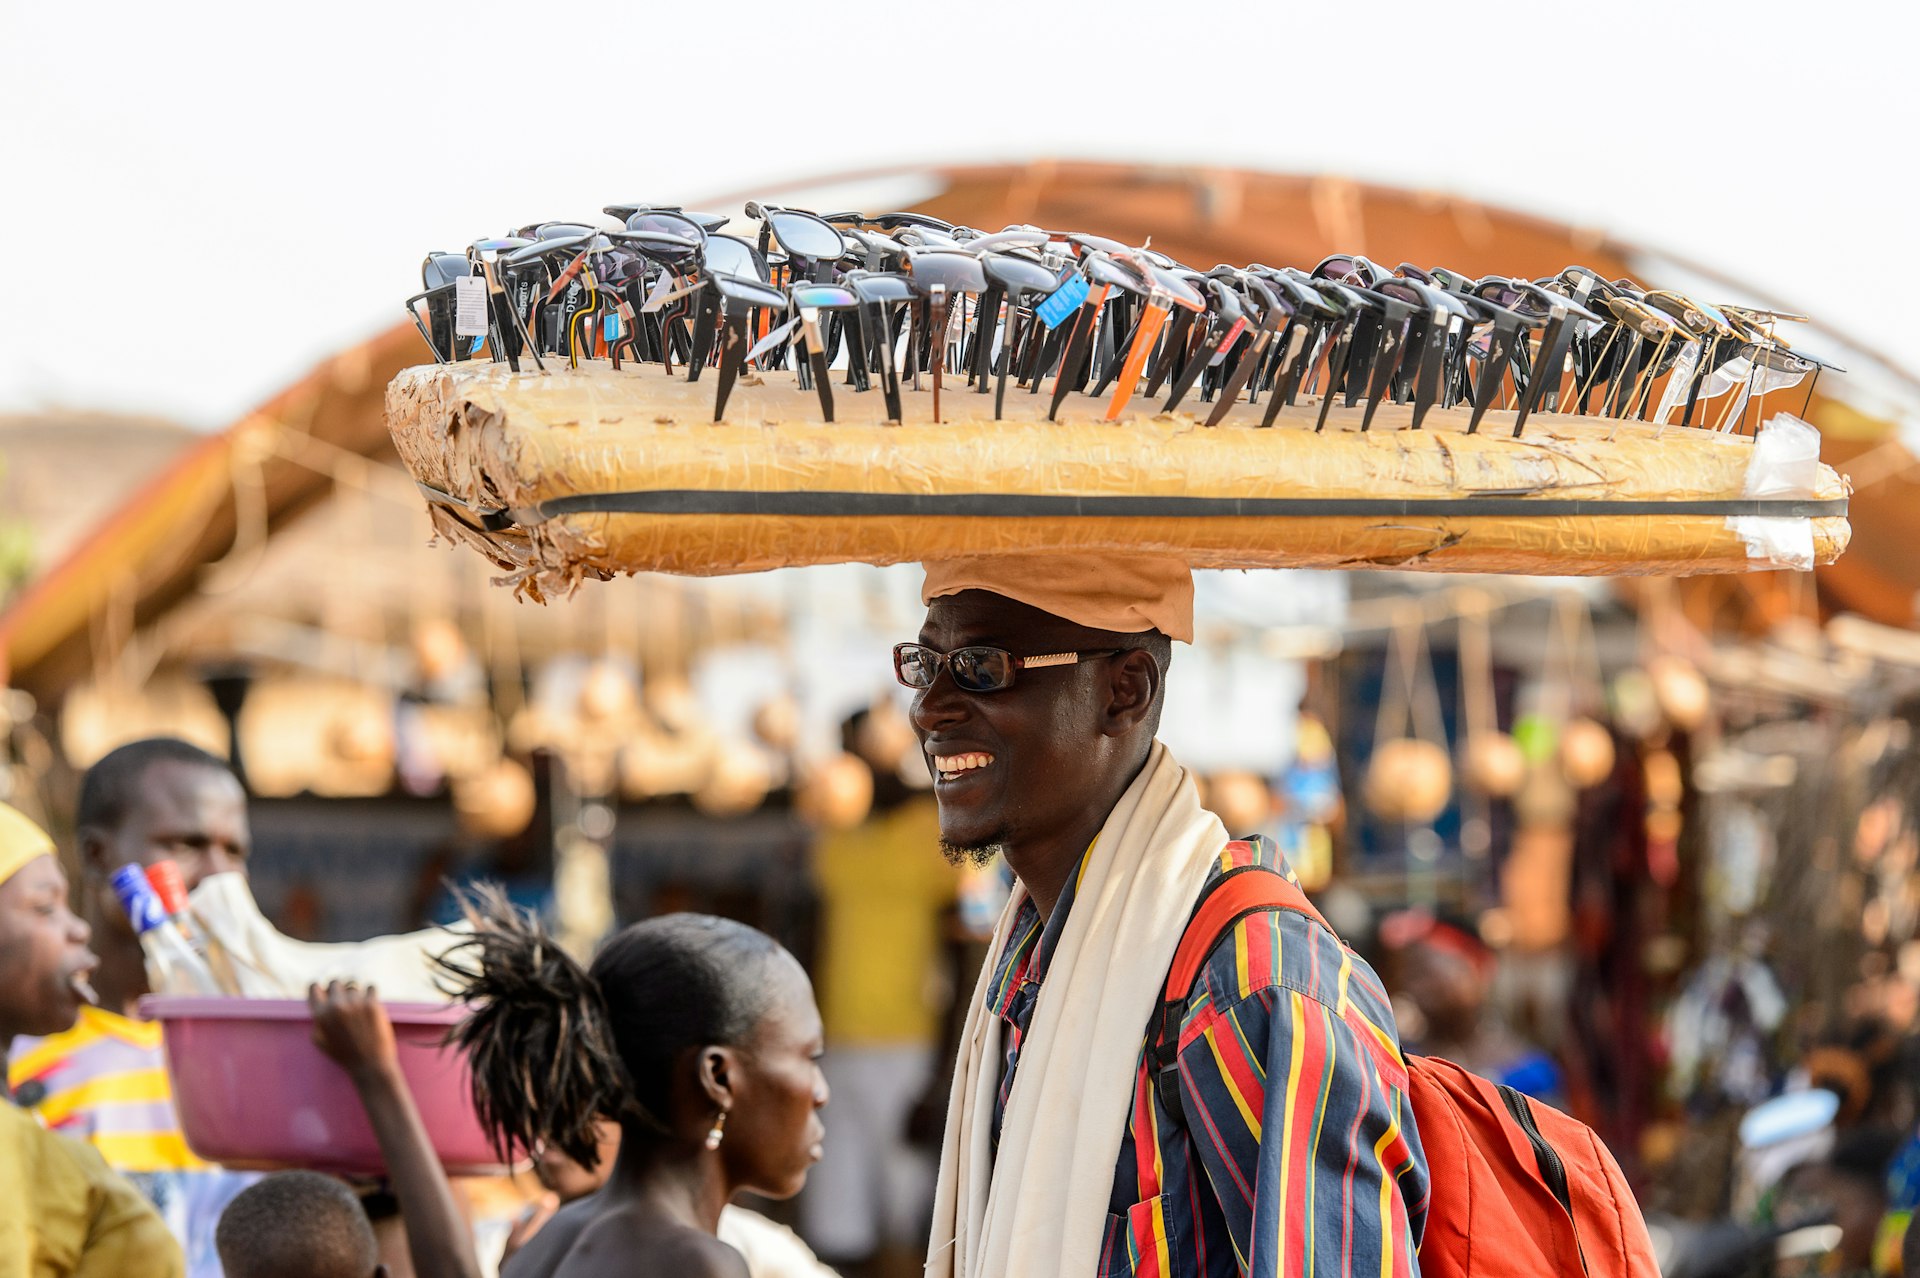 A Beninese man carries a lot of sunglasses on his head for sale at the local market. 